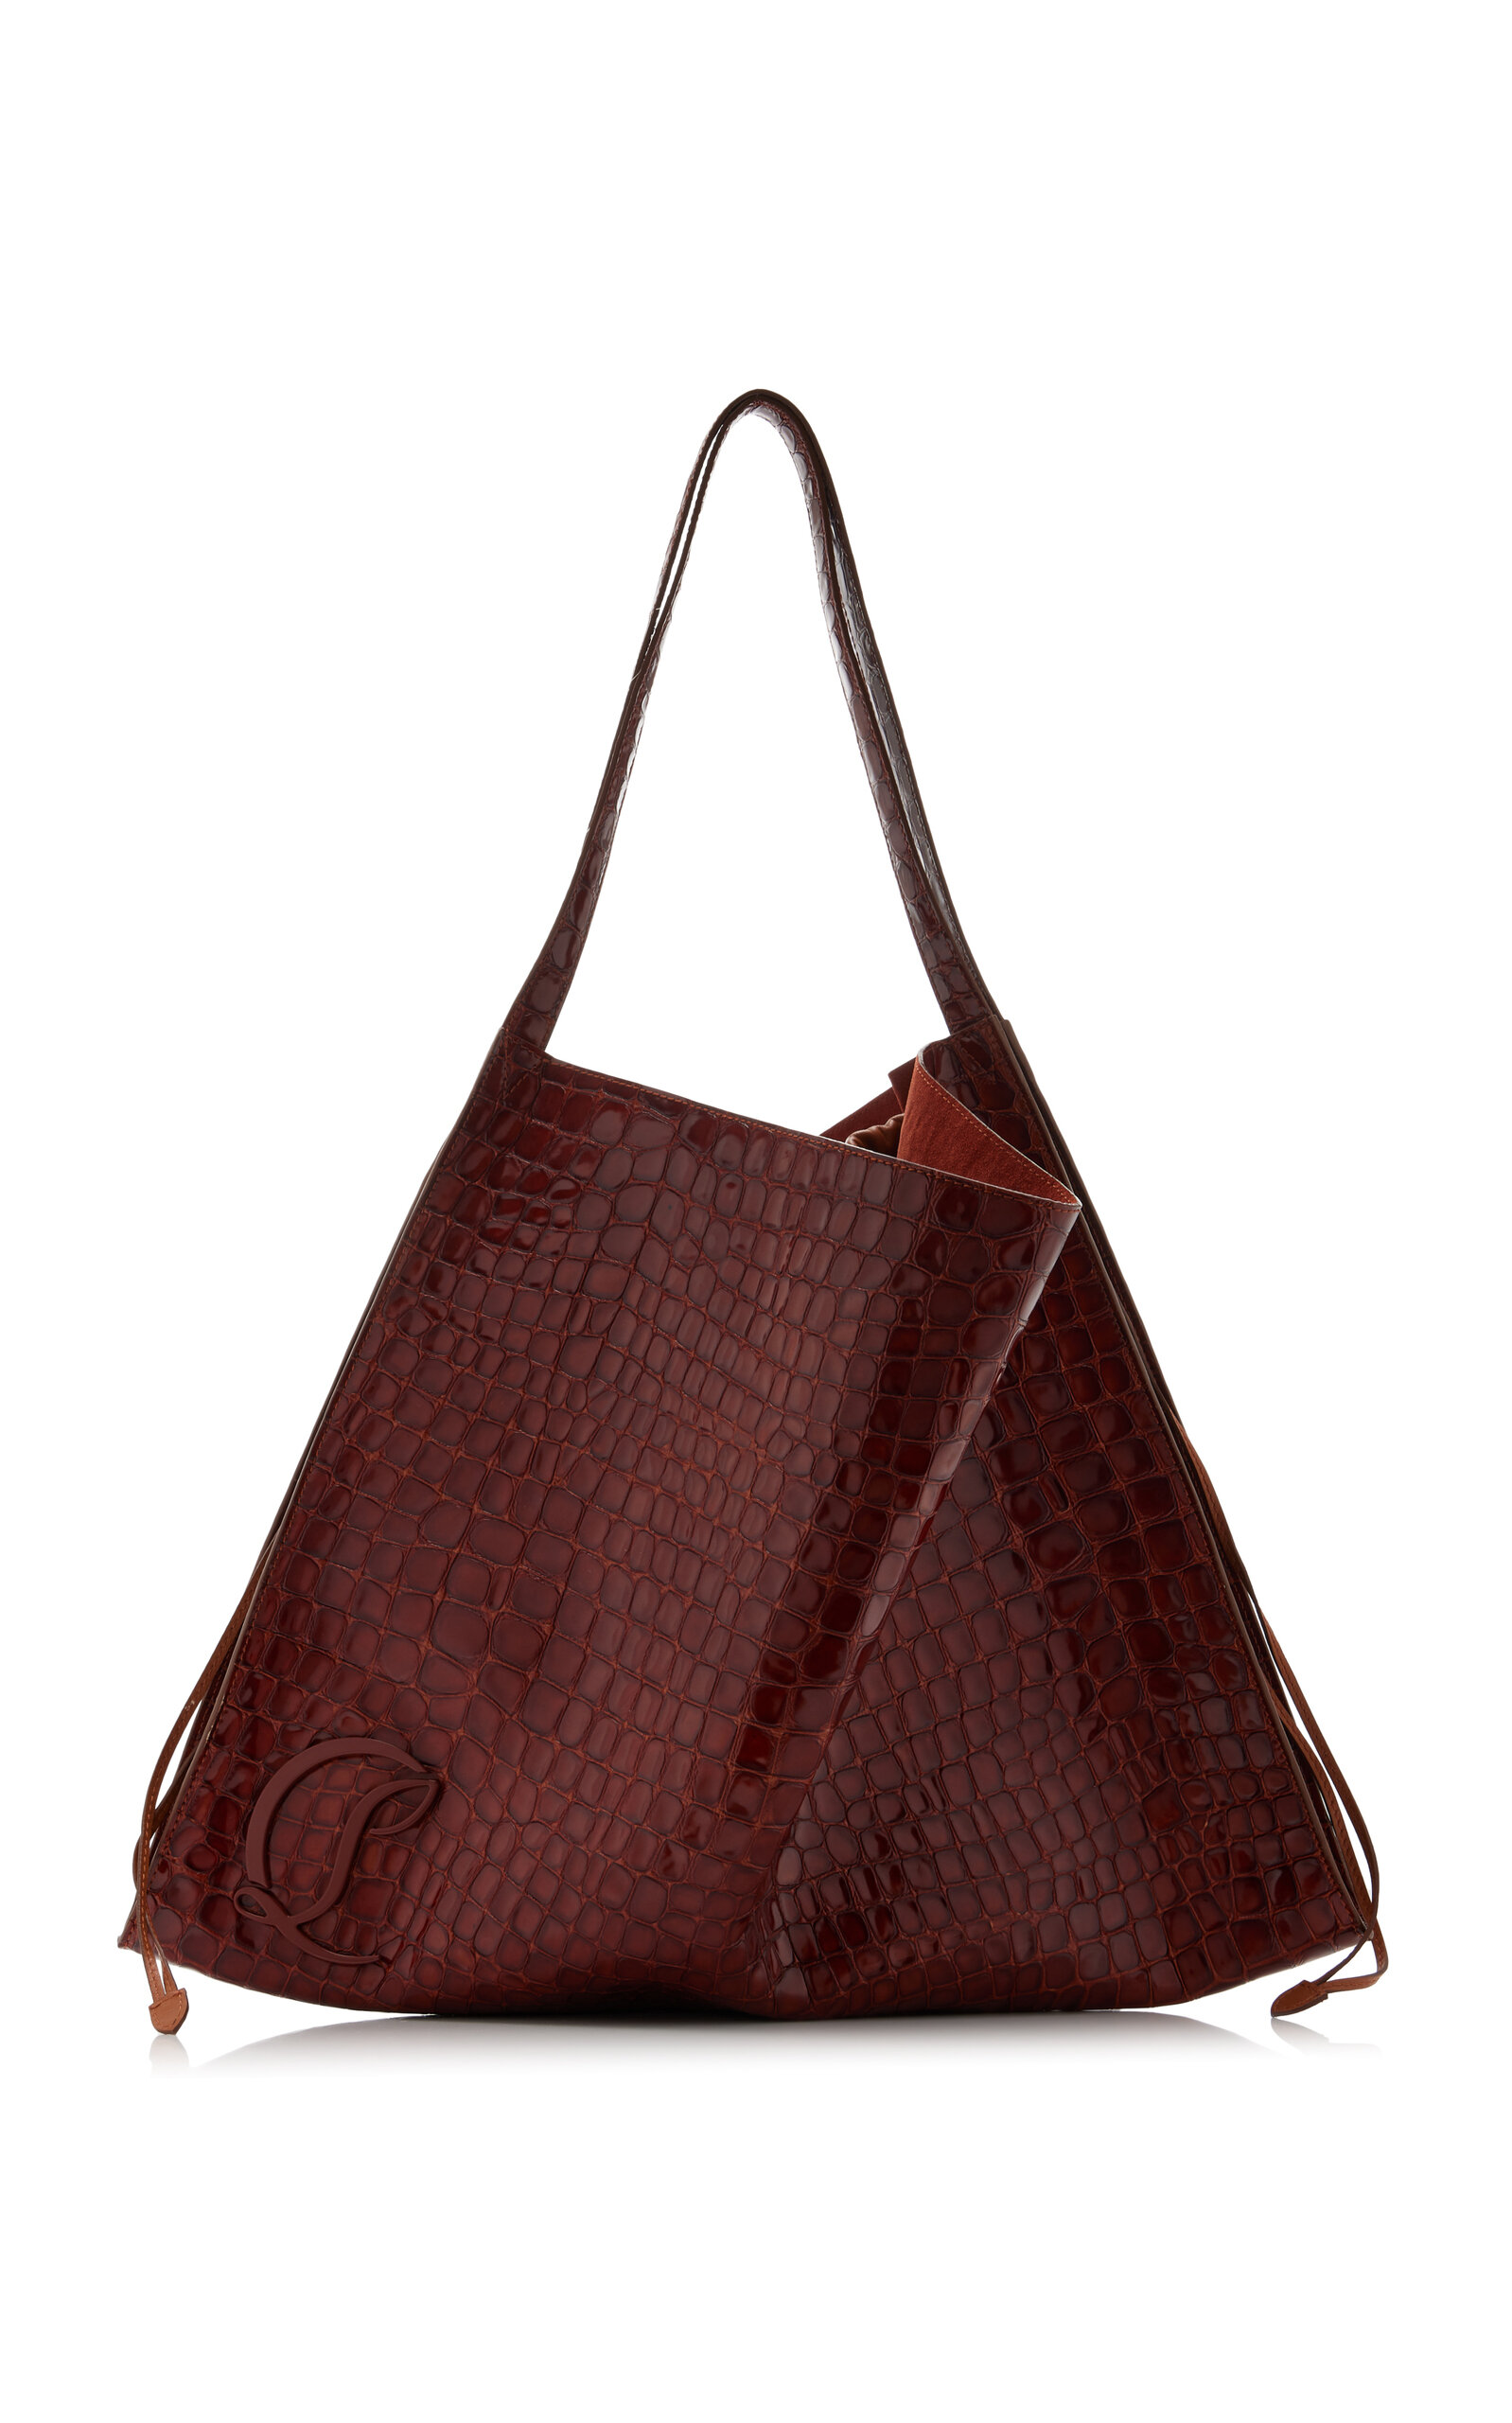 Le 54 Croc-Embossed Leather Tote Bag